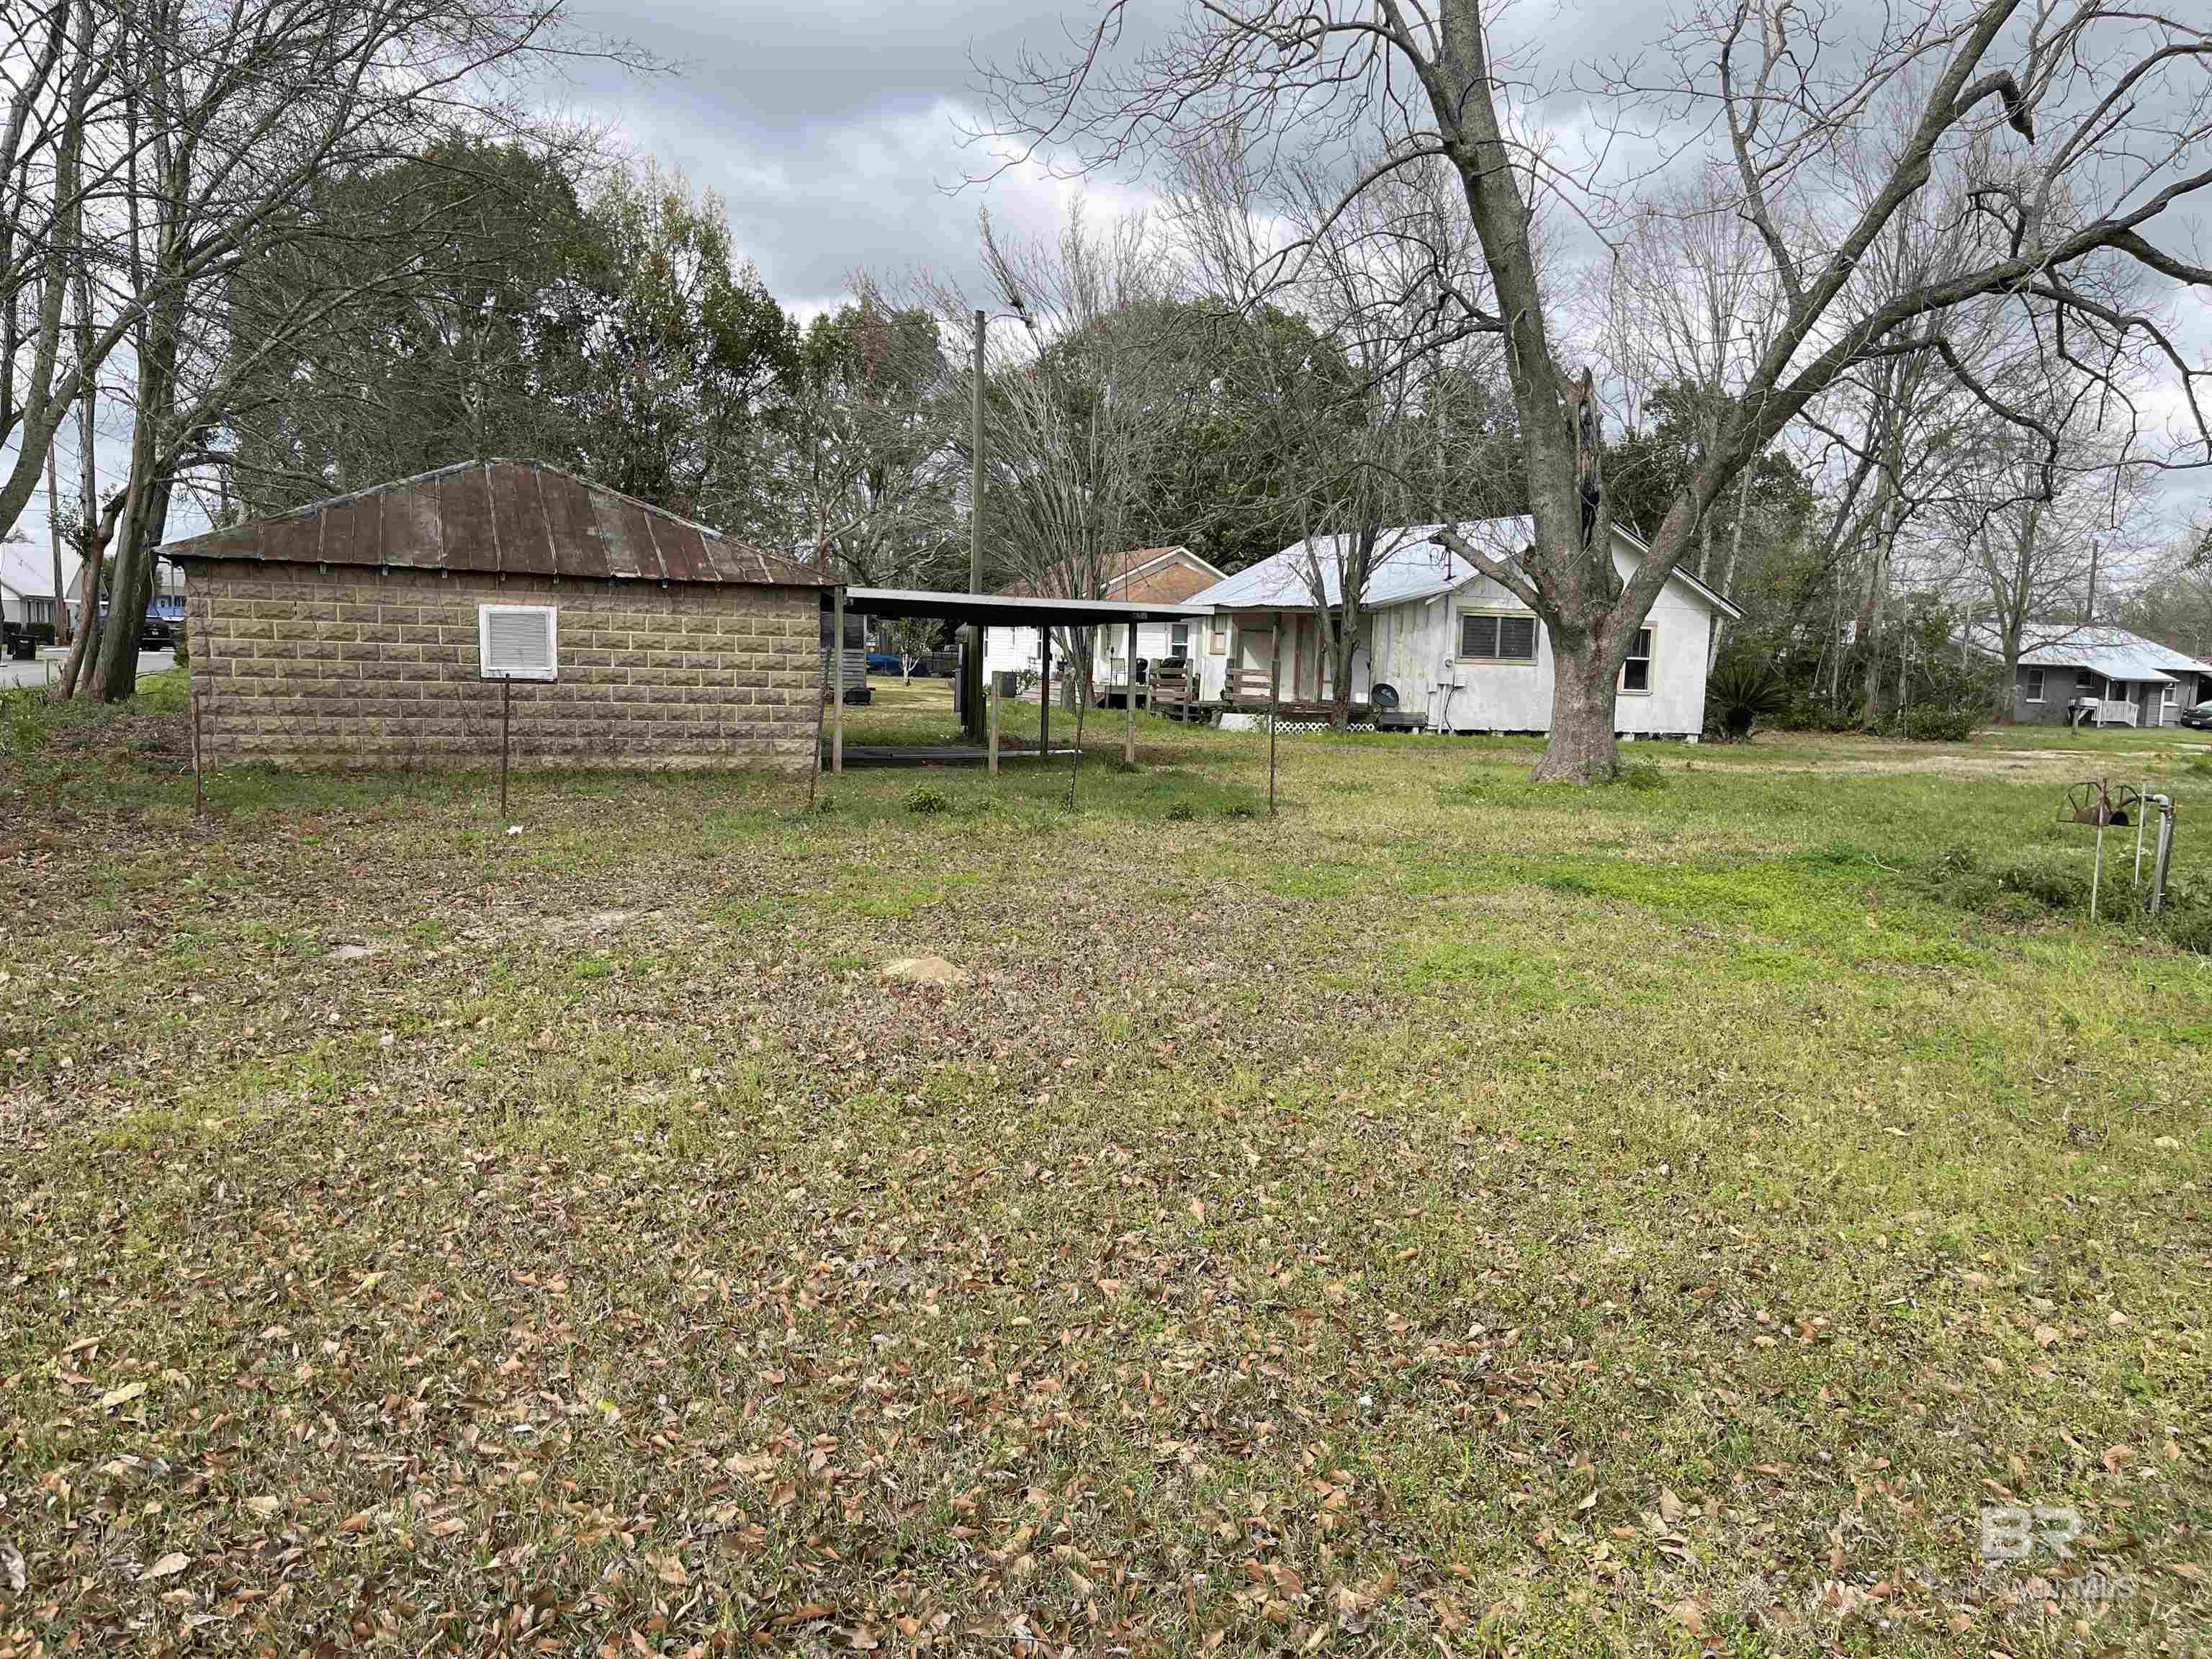 Here is an opportunity to own three lots in downtown Loxley and visible from State Highway 59. Great location for an office building, retail space or so many other  uses. There is an old house on one of the lots and a detached garage on another one and the third is unimproved. Property being sold "as is".